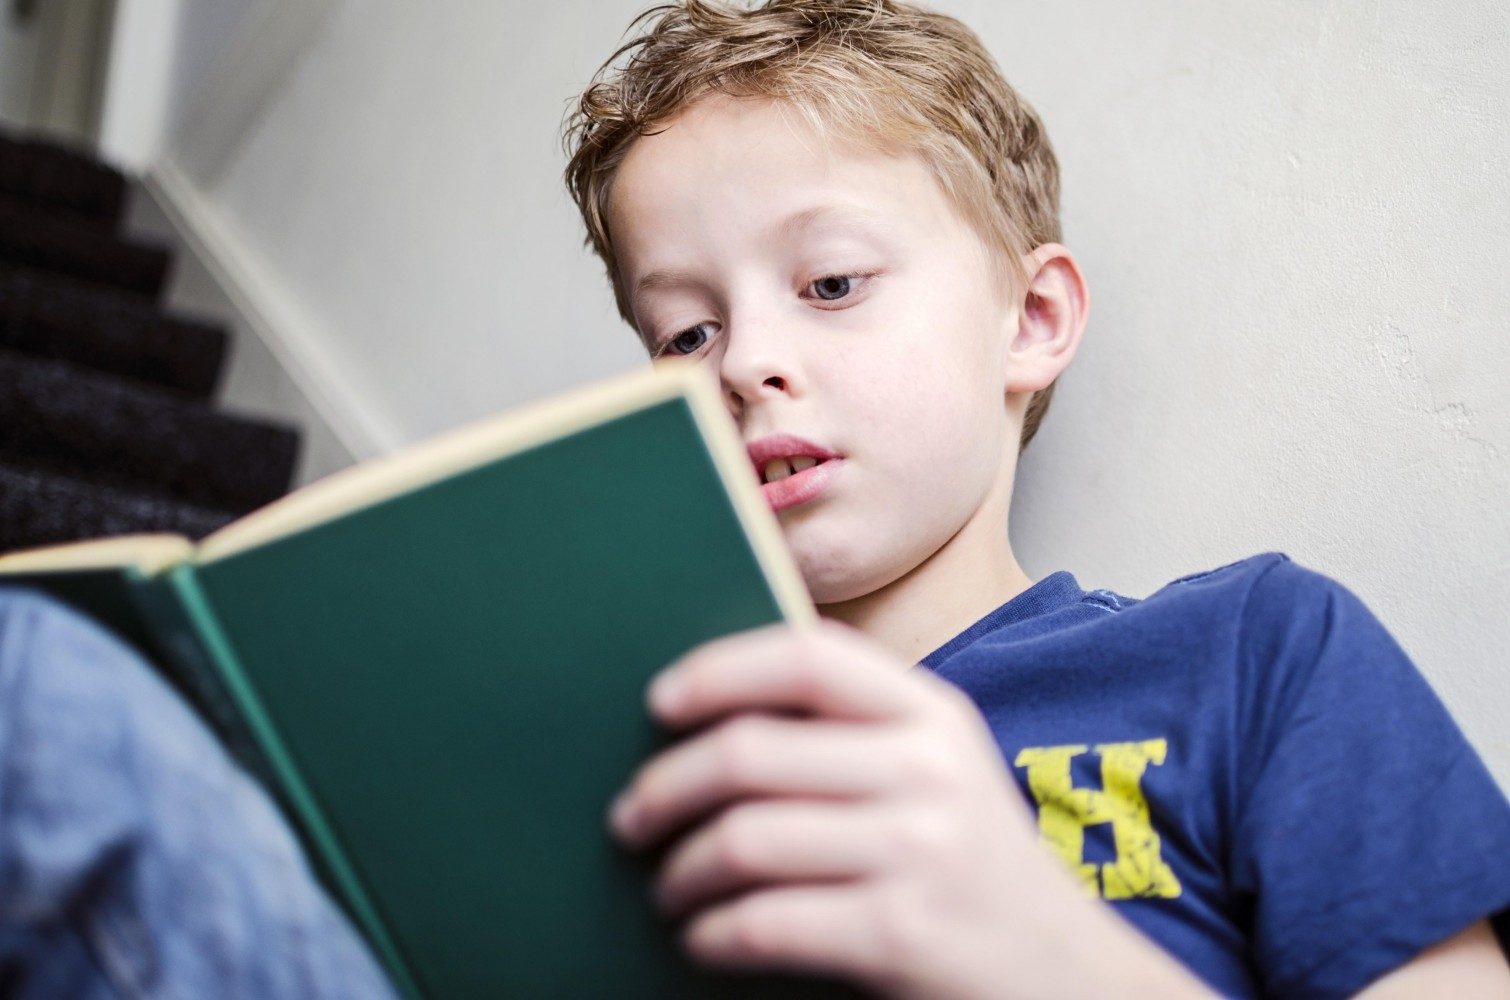 How to Improve Reading Comprehension Skills